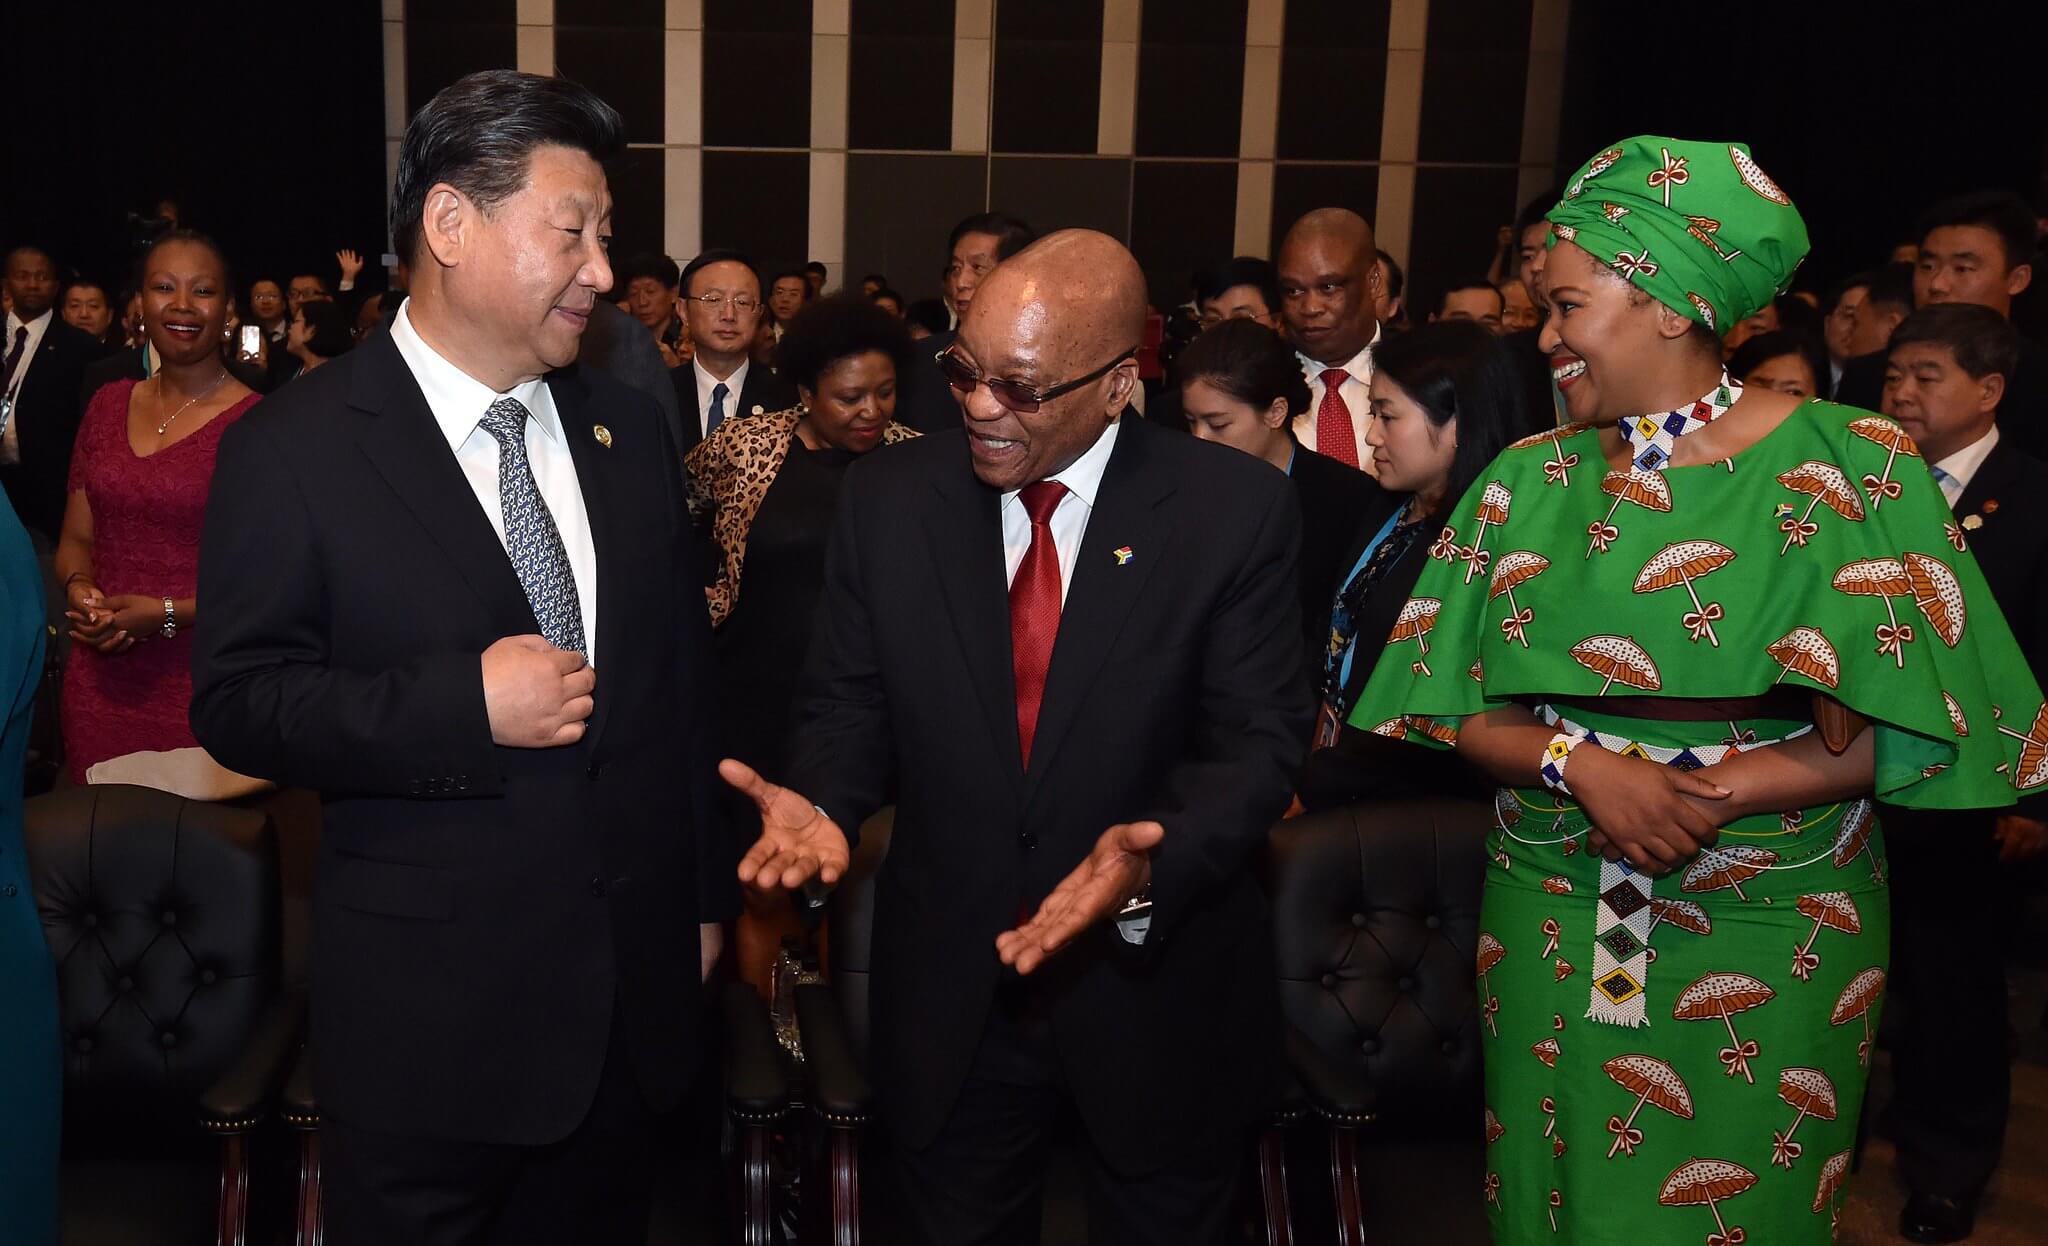 President Xi Jinping at an African Forum, 2015. © Flickr / GovernmentZA